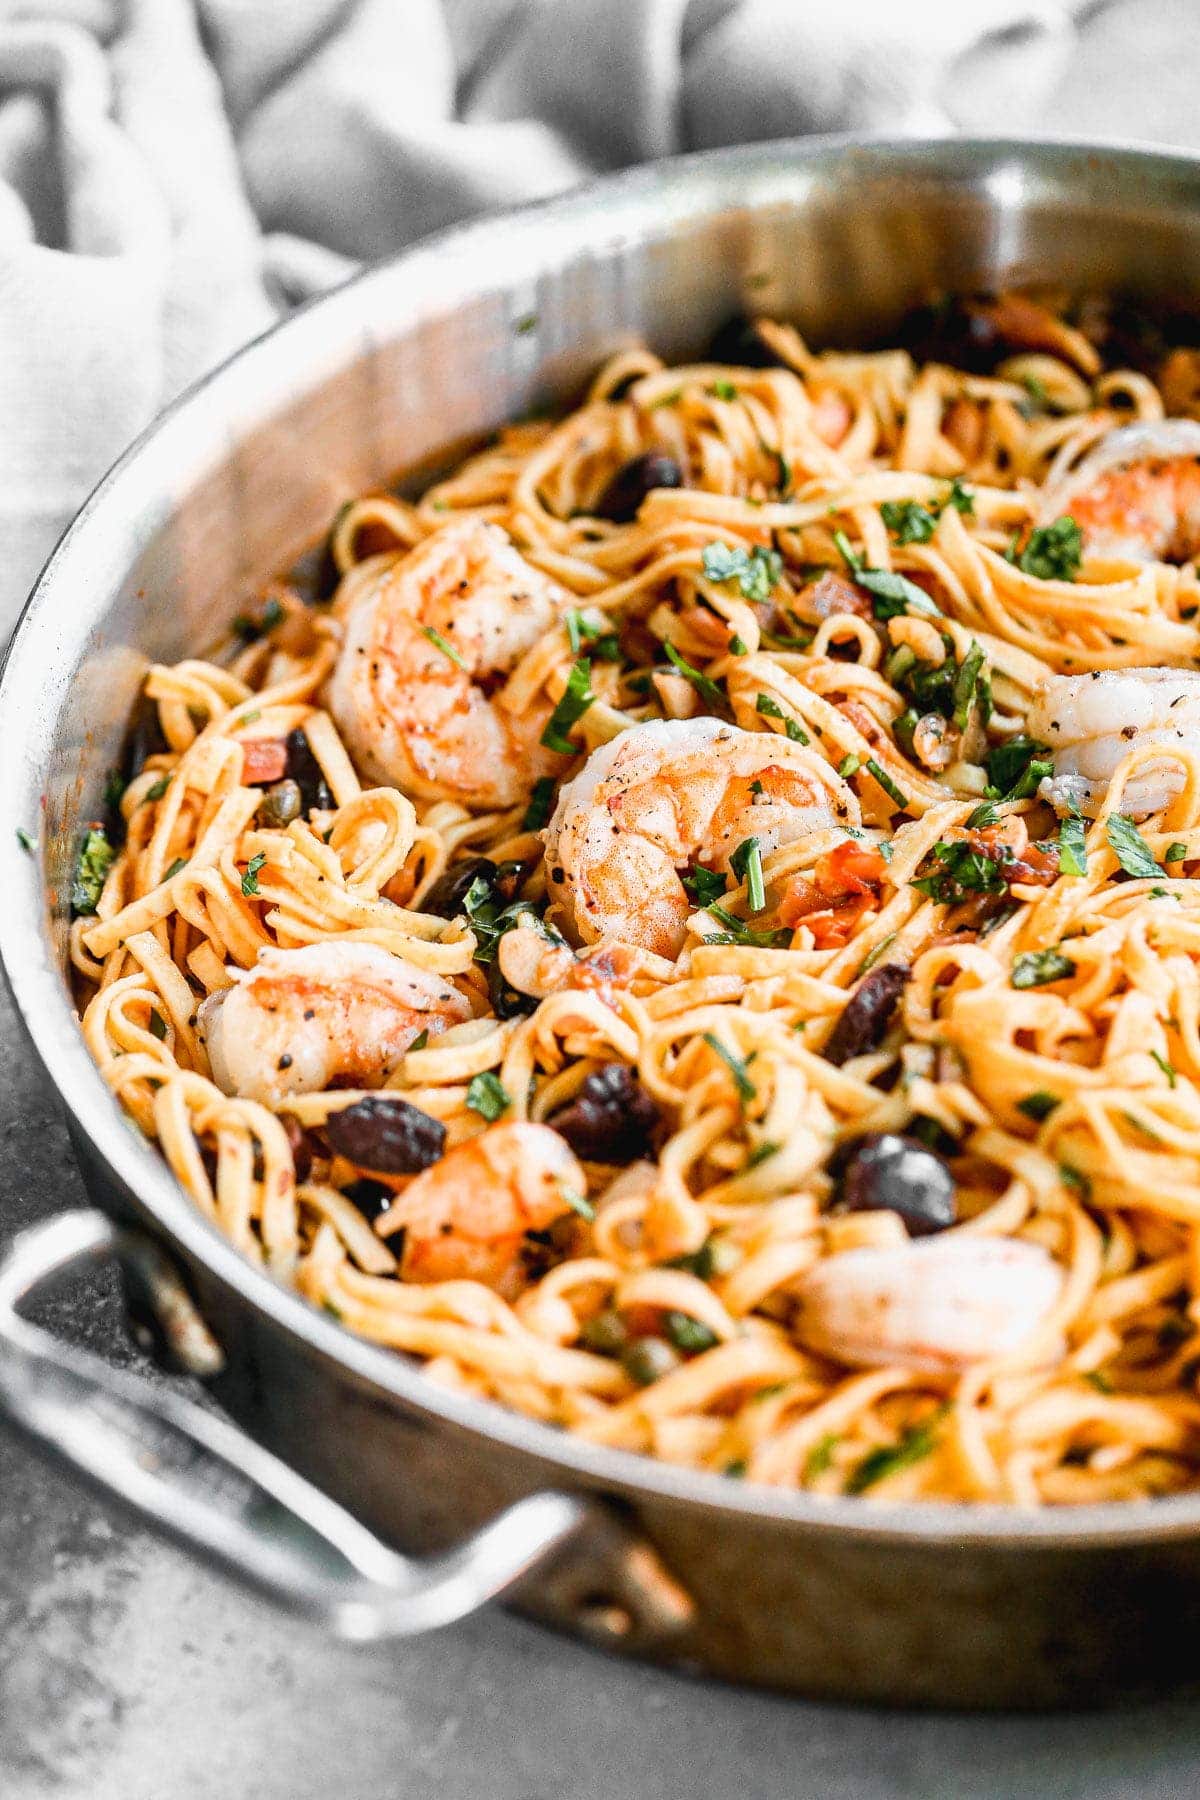 A classic pasta - shrimp puttanesca - showcases all the thing I love about the Mediterranean diet. Fresh linguine noodles are tossed with a impossibly simple tomato infused white wine sauce and studded with briny, salty capers and olives. With a heavy hand of garlic and a sprinkling of freshly grated parmesan cheese, this easy pasta dish manages to be utterly delicious and light and healthy at the same time. 